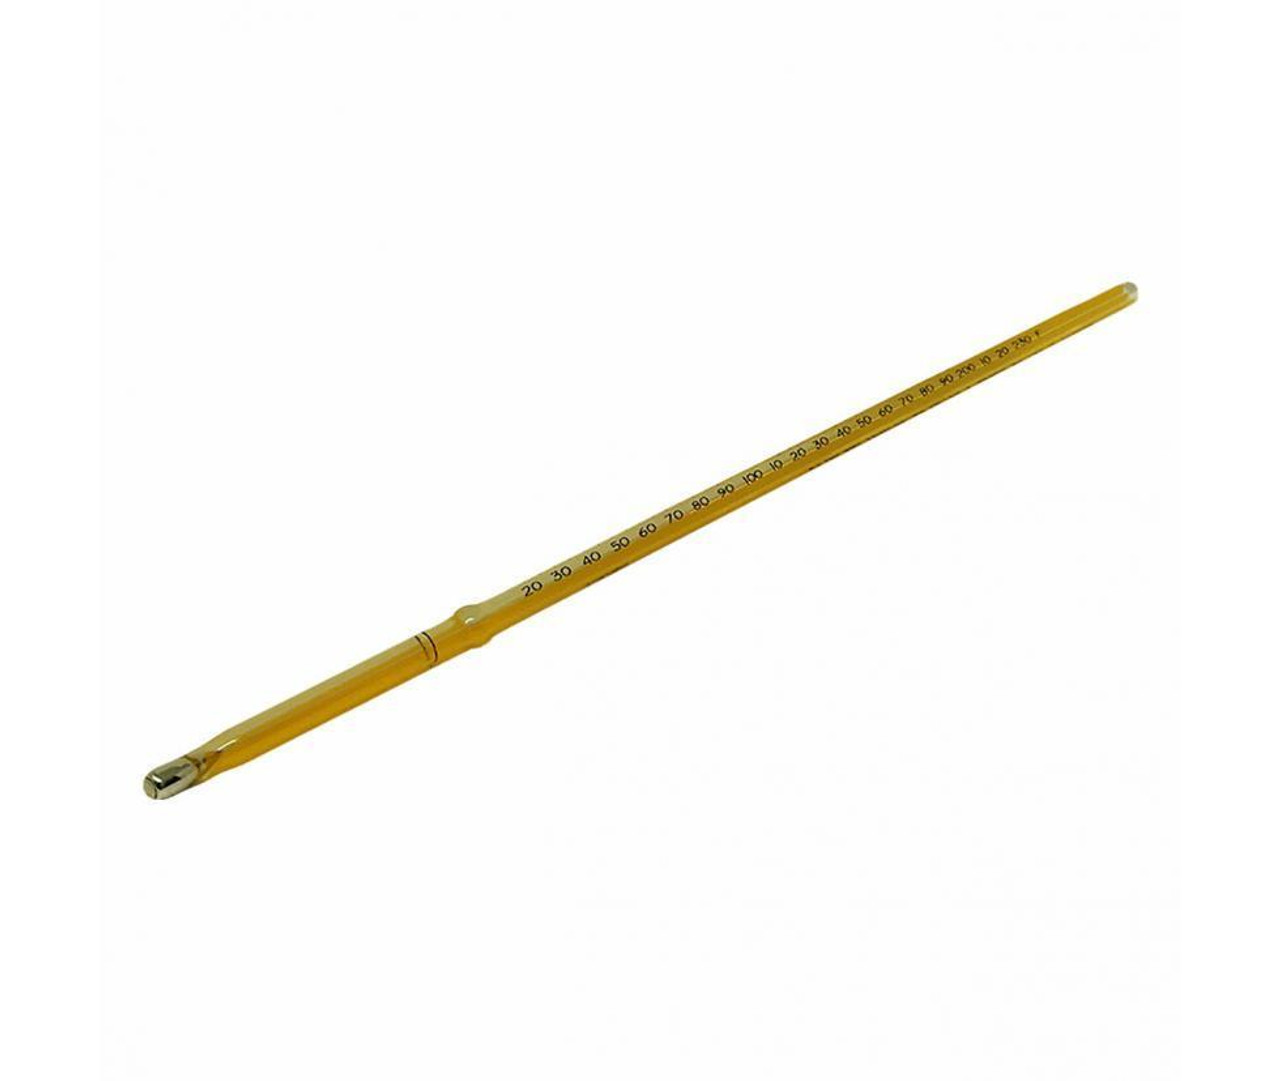 ASTM 71C Oil in Wax Thermometer, -37 to 21°C, Mercury Fill - T4180-71C -  General Laboratory Supply